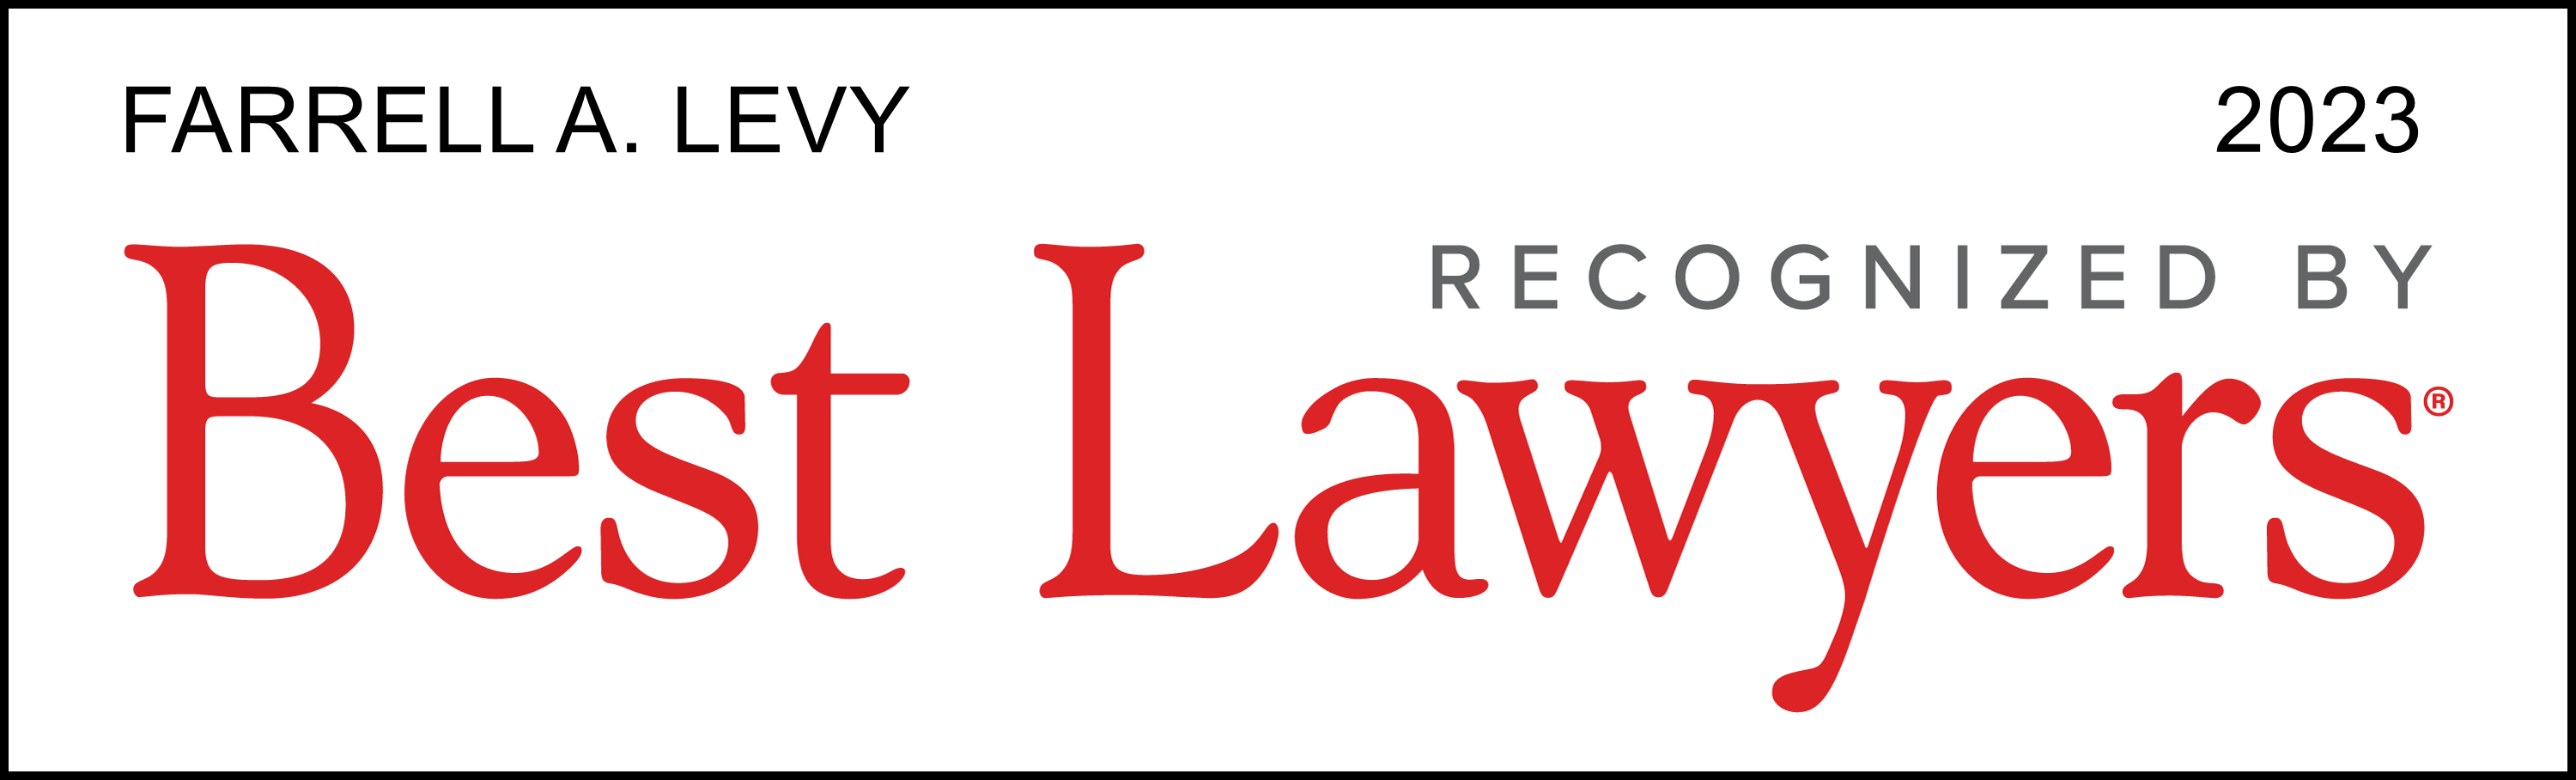 Farrell Levy recognized by Best Lawyers 2023